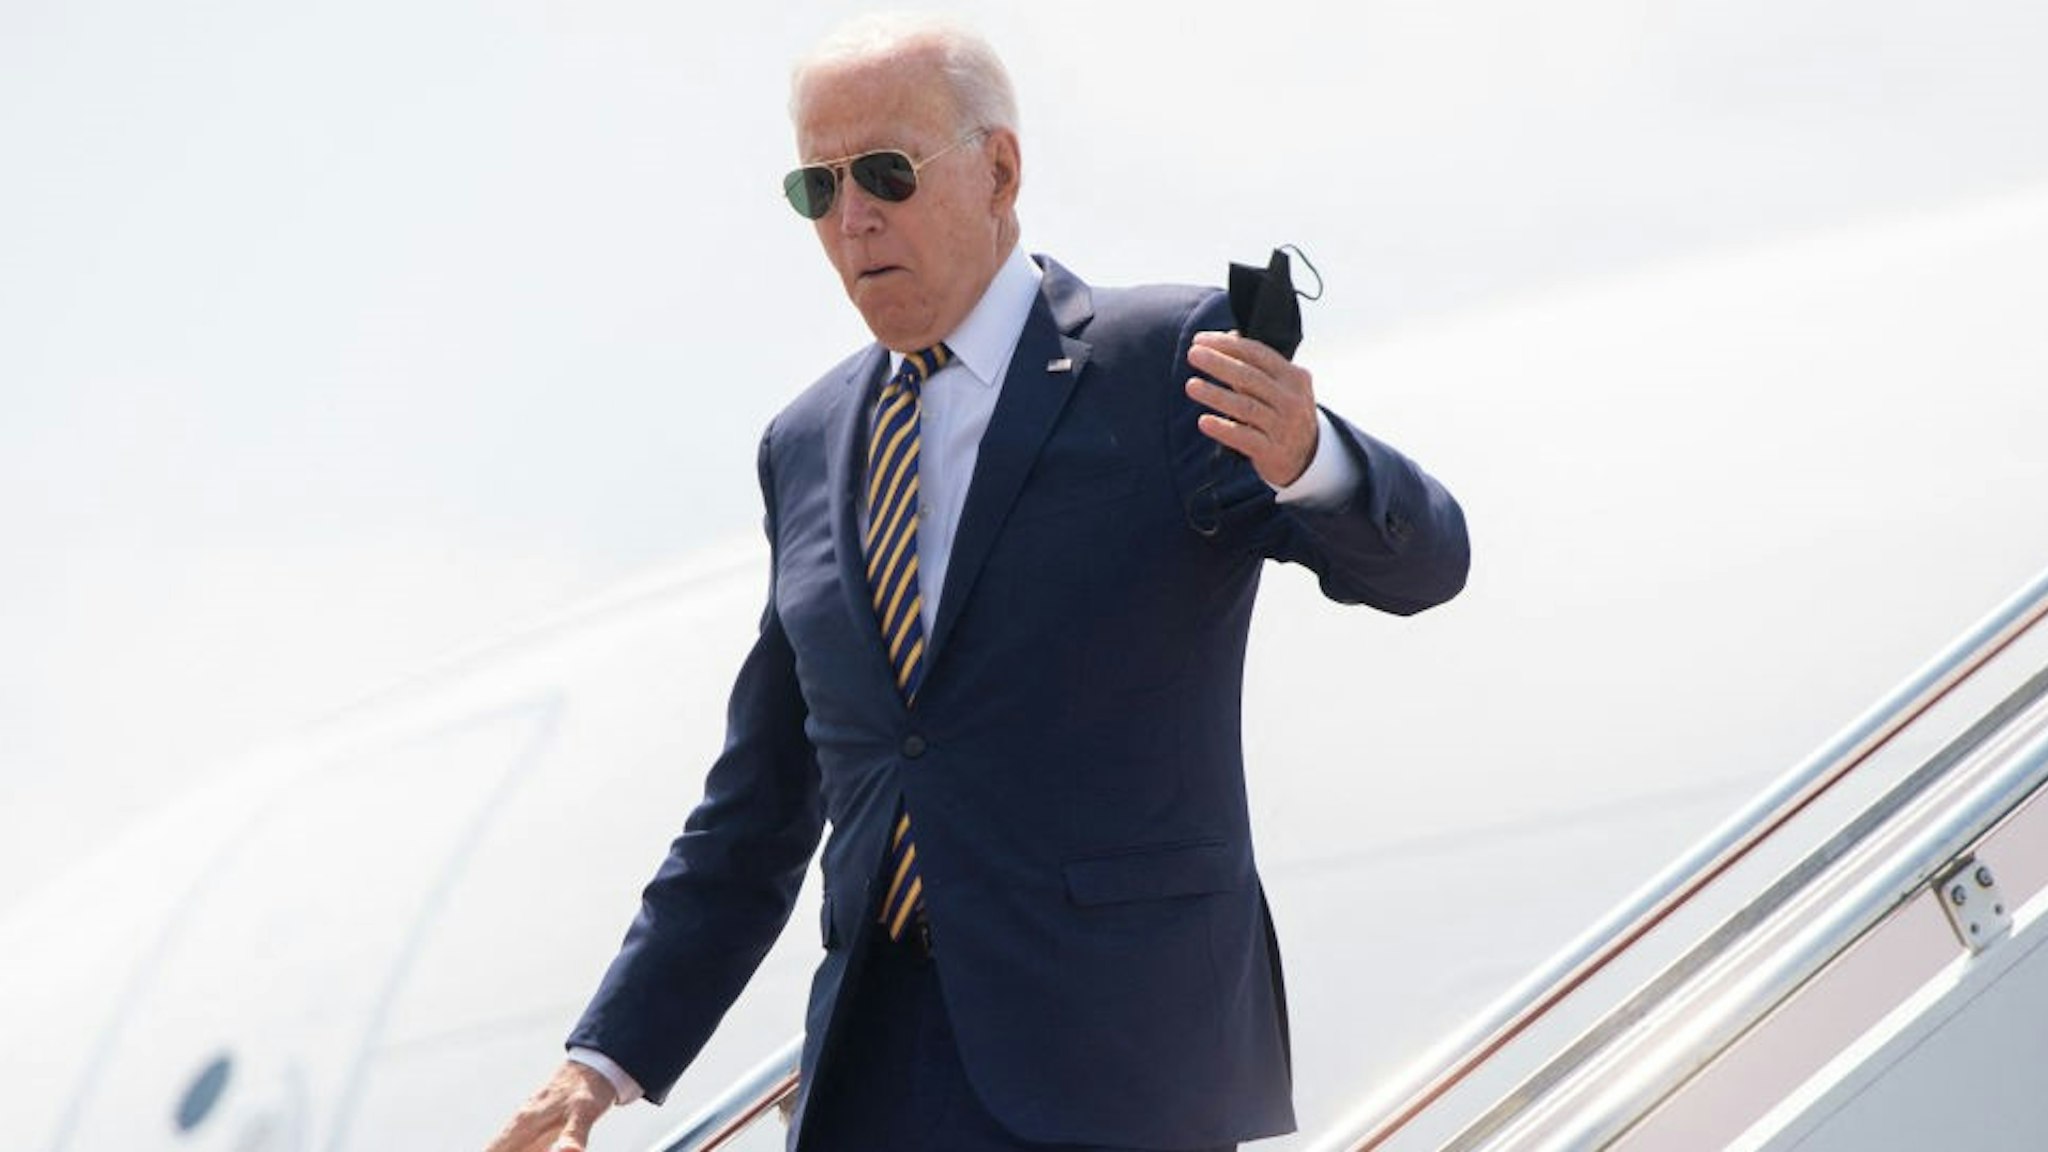 US President Joe Biden disembarks from Air Force One upon arrival at Lehigh Valley International Airport in Allentown, Pennsylvania, July 28, 2021, as he travels to speak on the economy. (Photo by SAUL LOEB / AFP) (Photo by